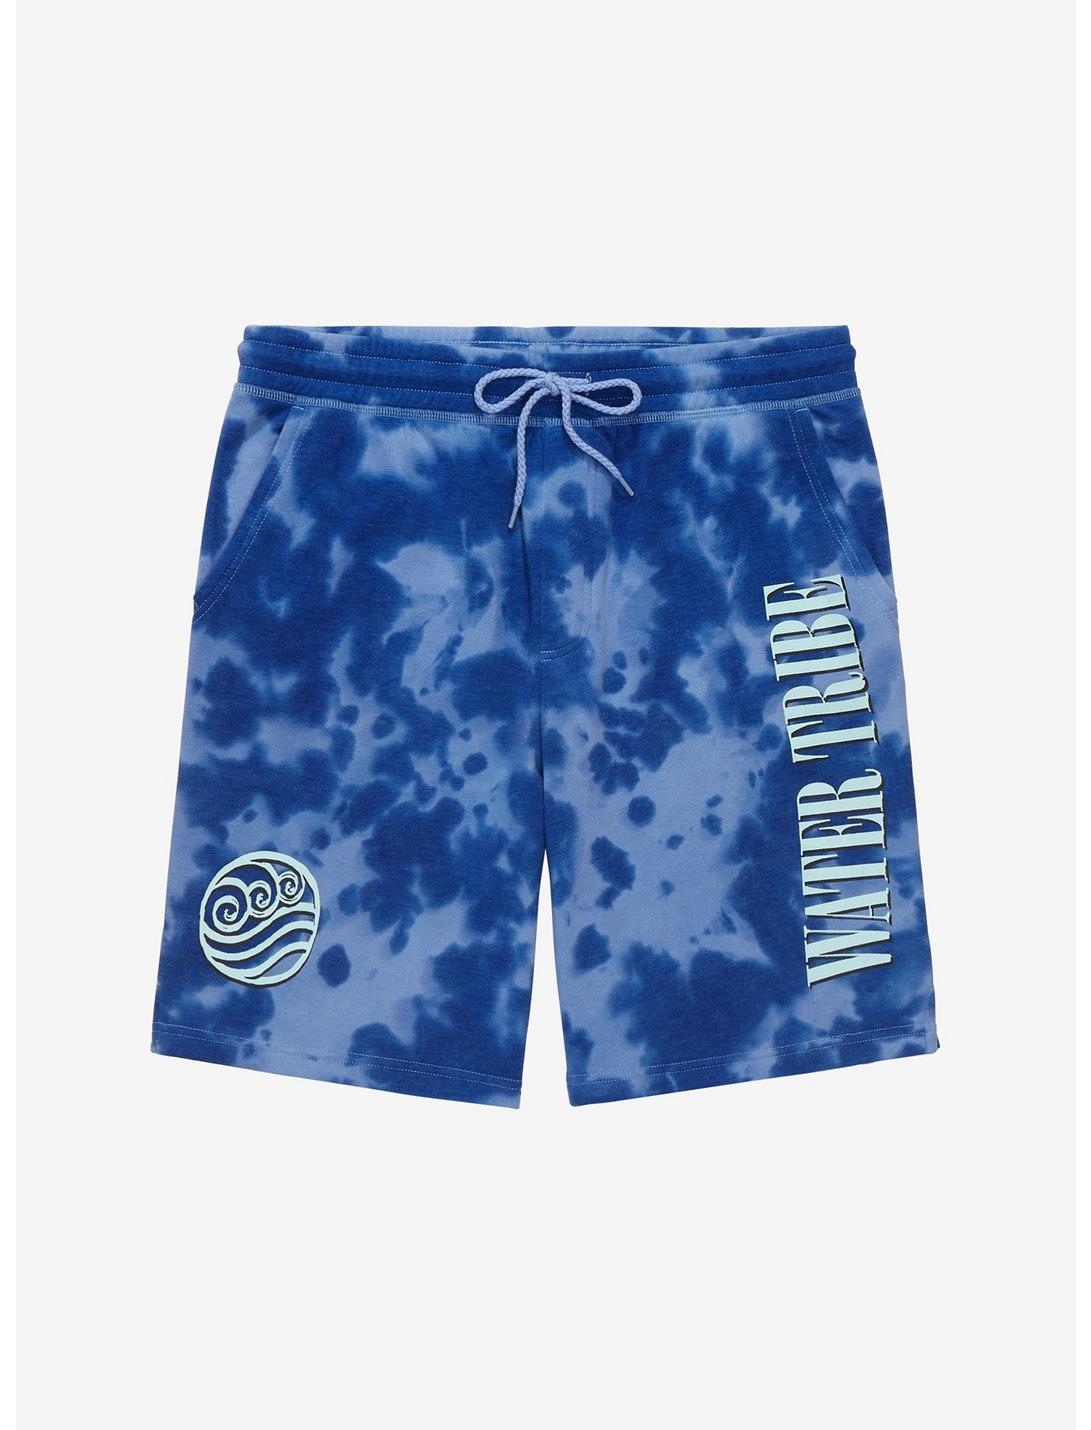 Avatar: The Last Airbender Water Tribe Tie-Dye Shorts - BoxLunch Exclusive, MULTI, hi-res